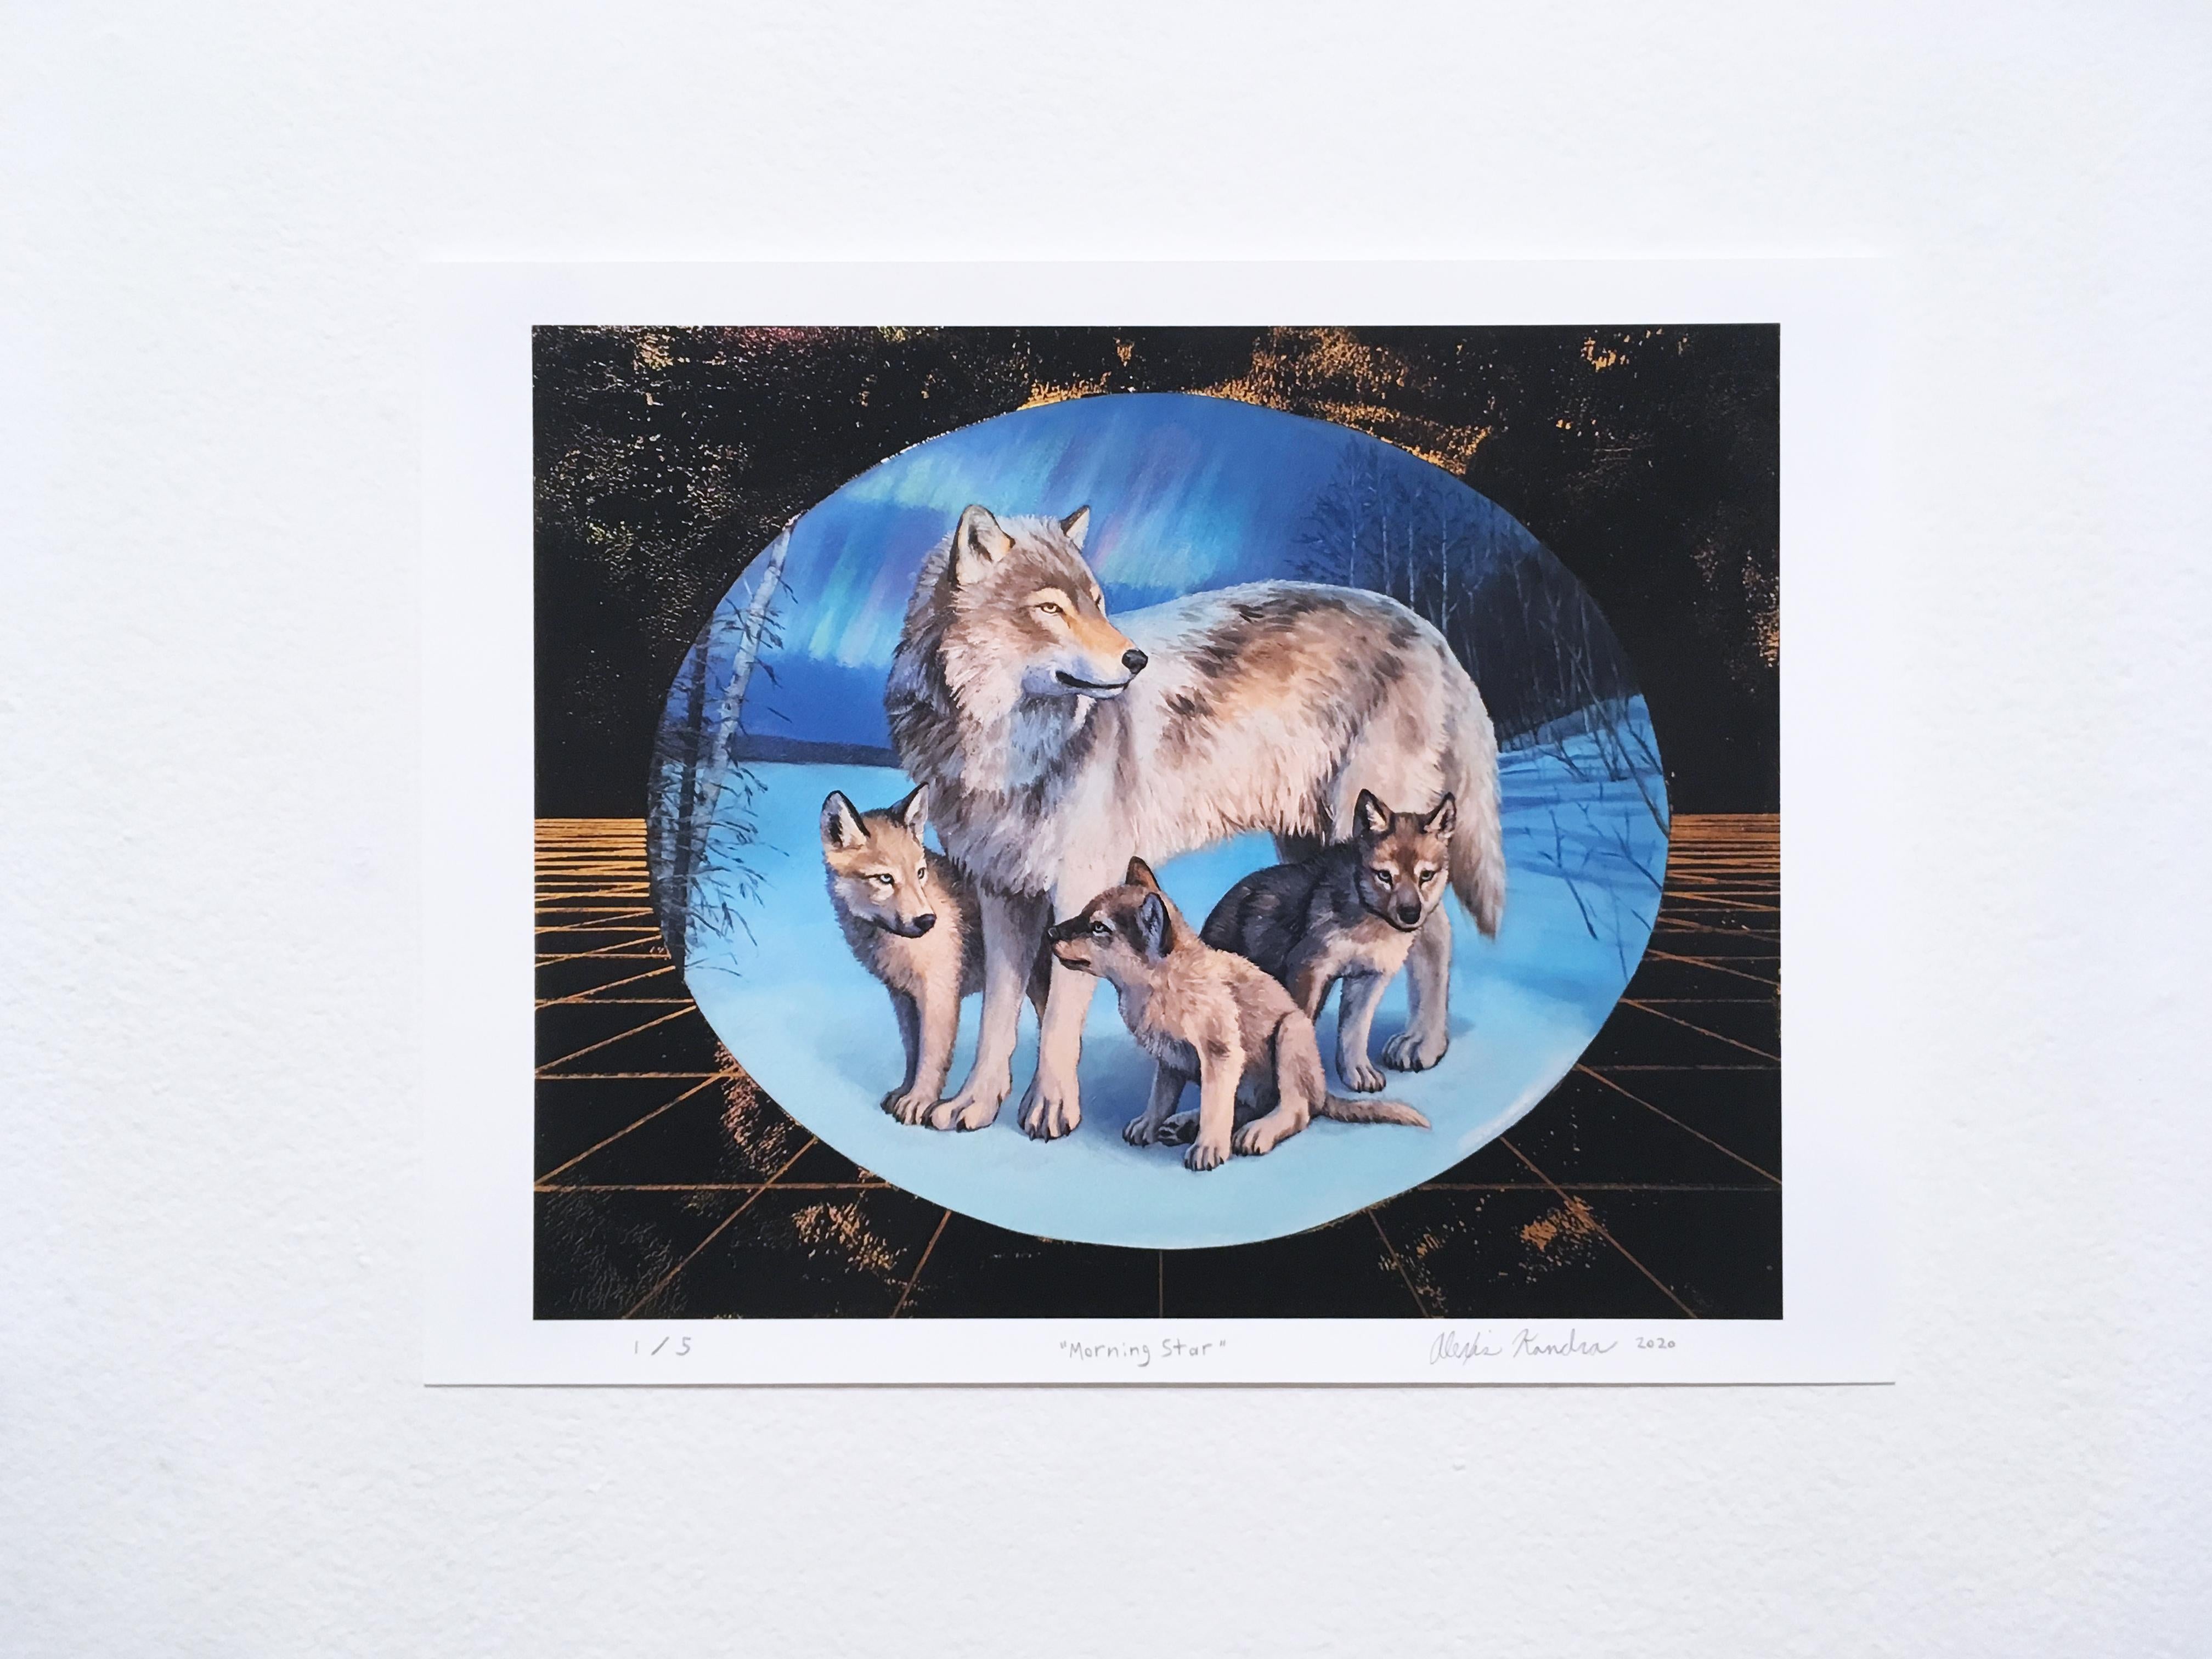 Morning Star, landscape, skyscape, mother wolf, cubs, wildlife, gold, blue print - Contemporary Print by Alexis Kandra